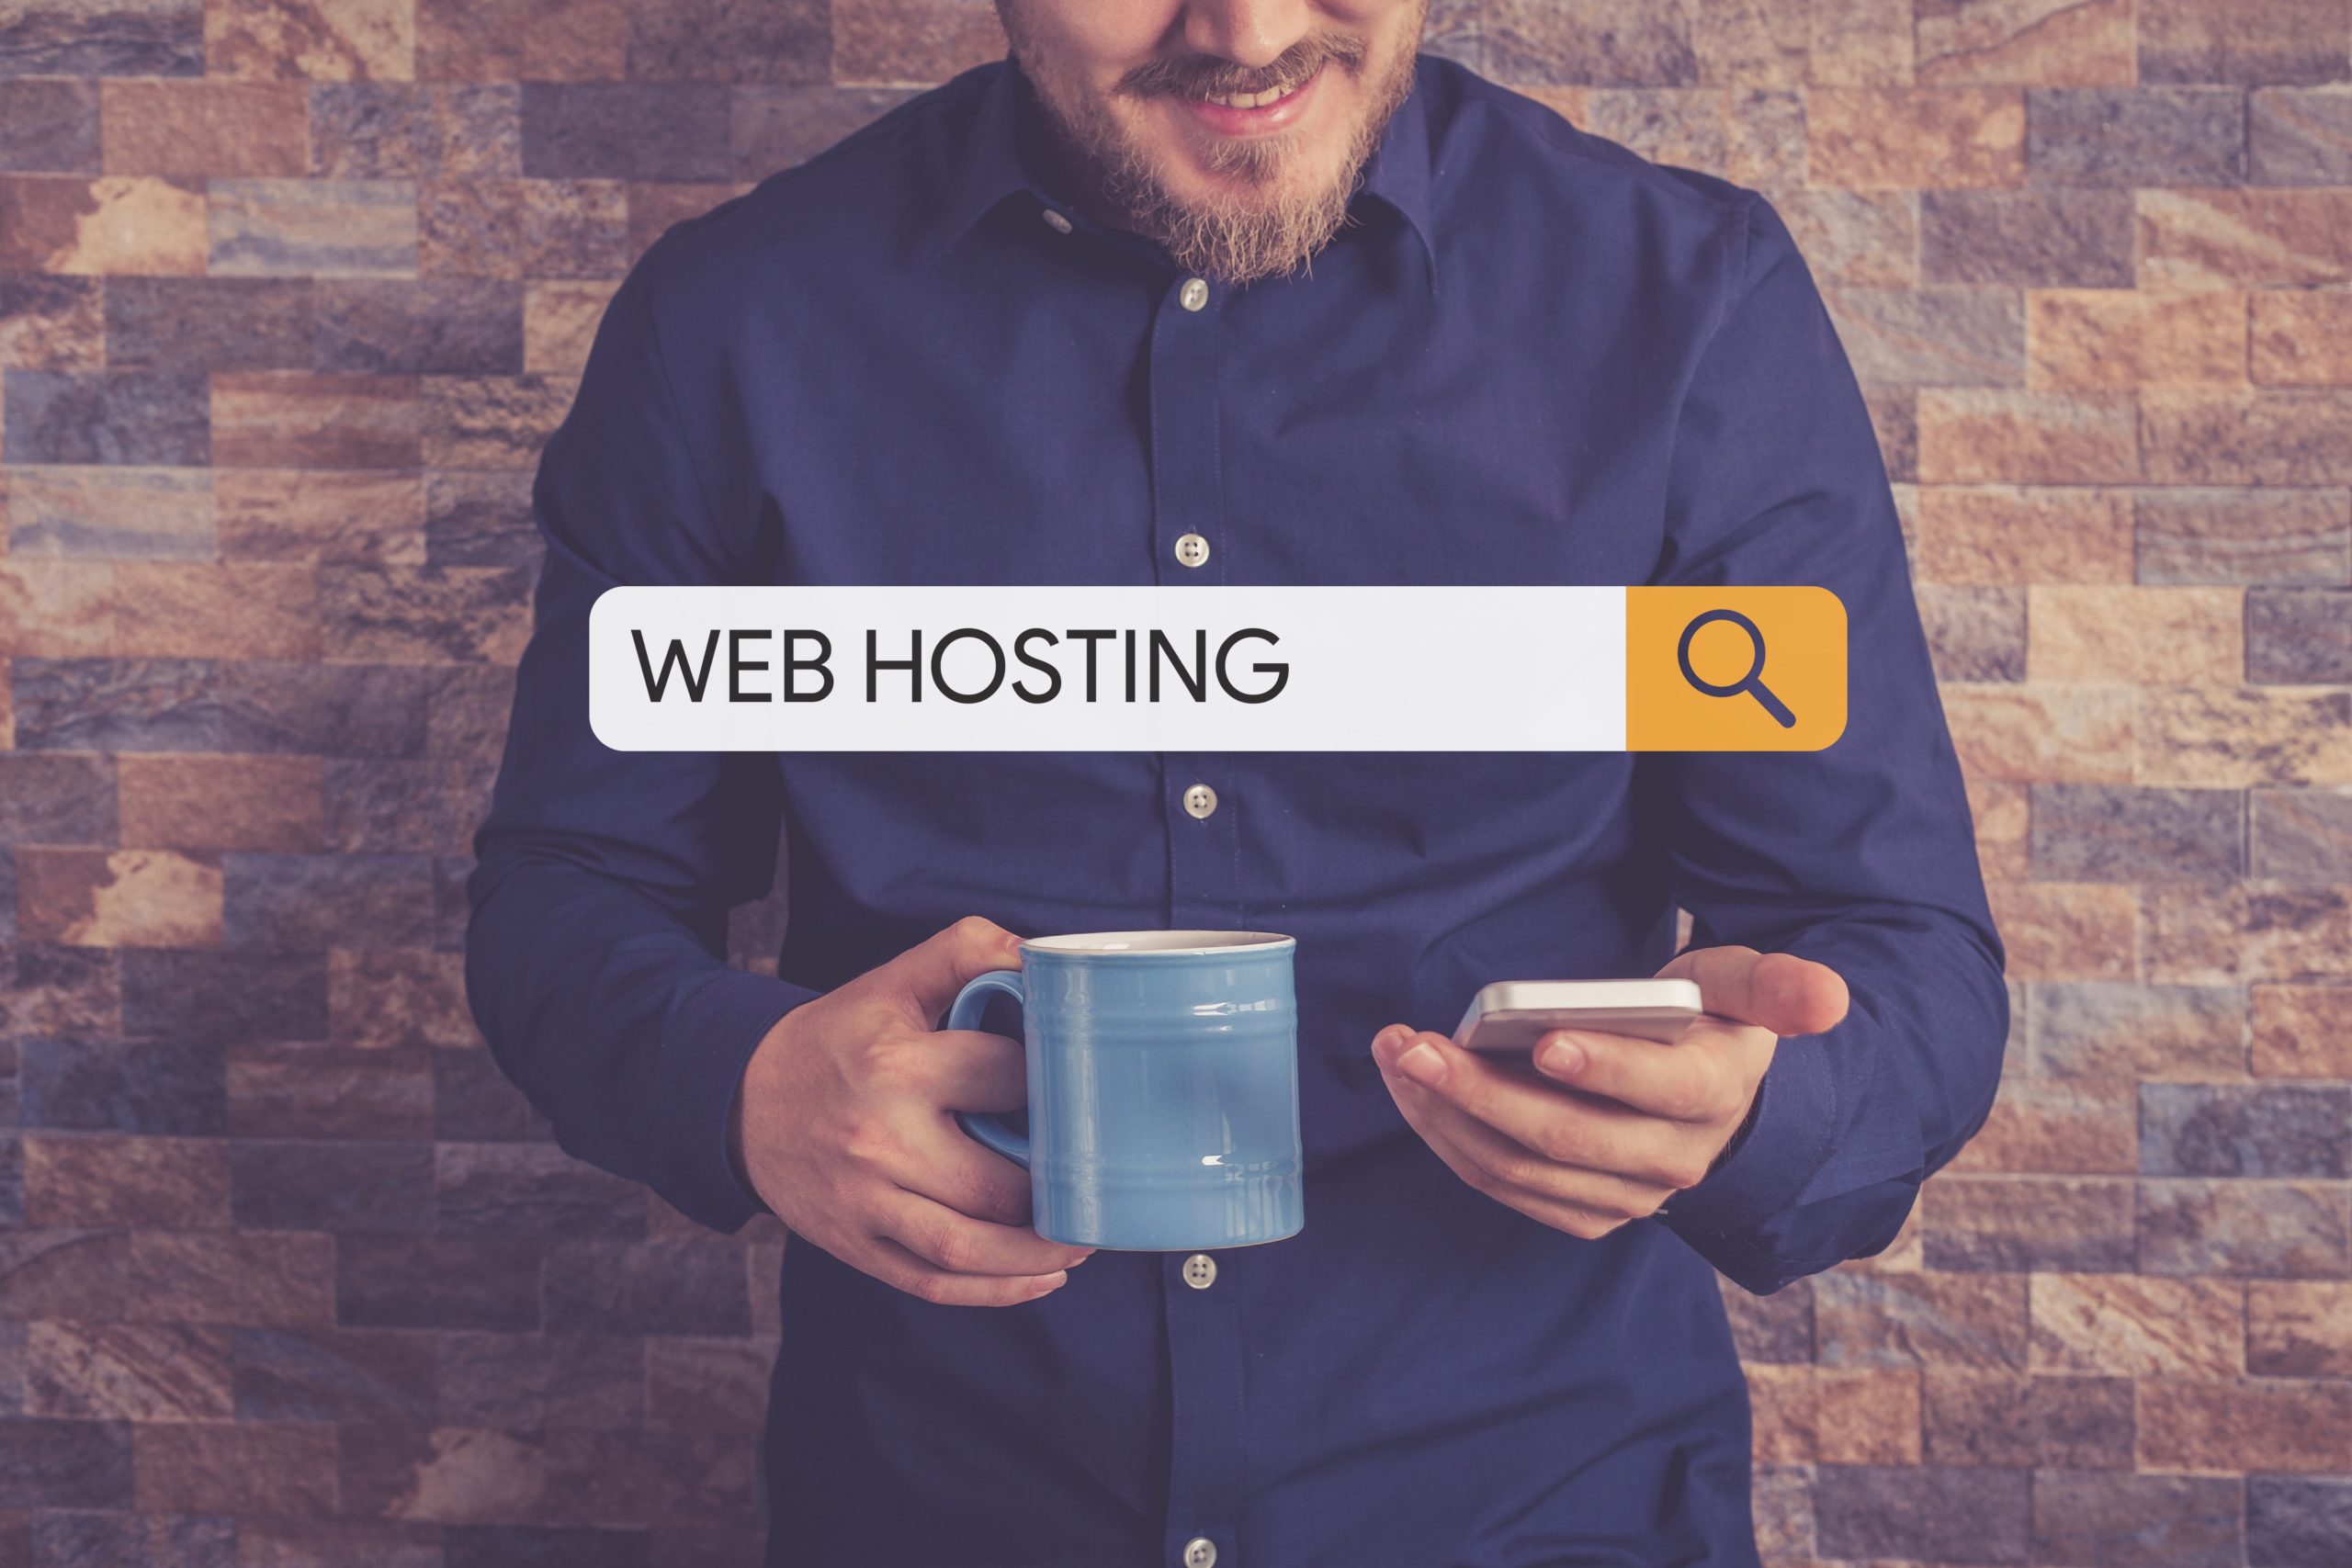 What to look for in a web hosting service